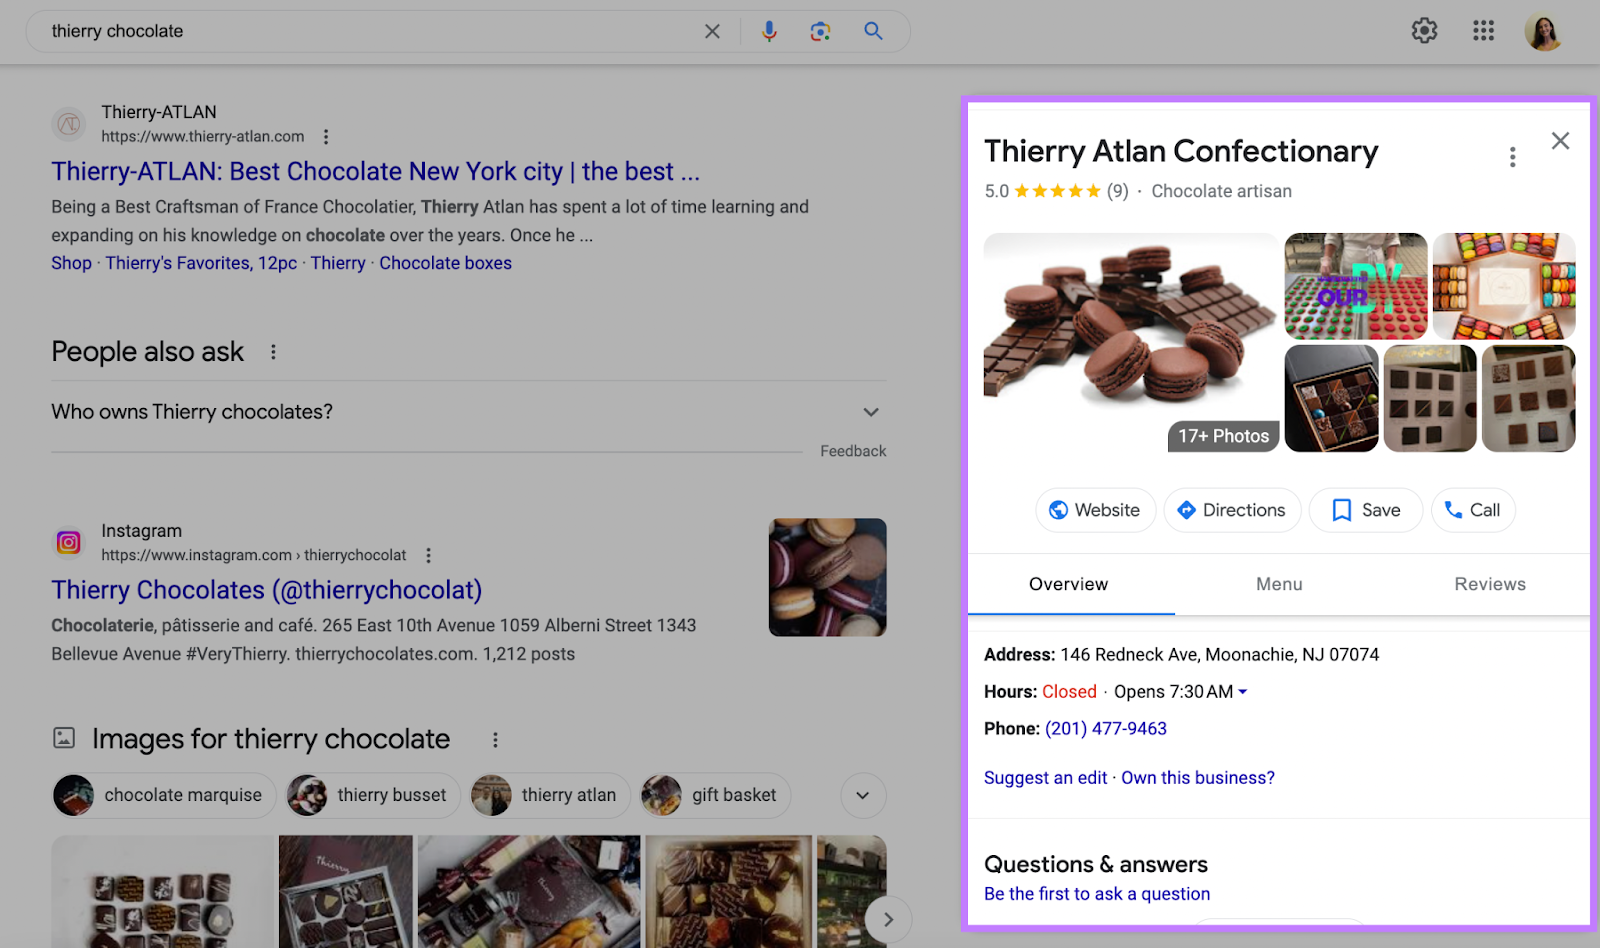 A Google Business Profile for "Thierry Atlan Confectionary"